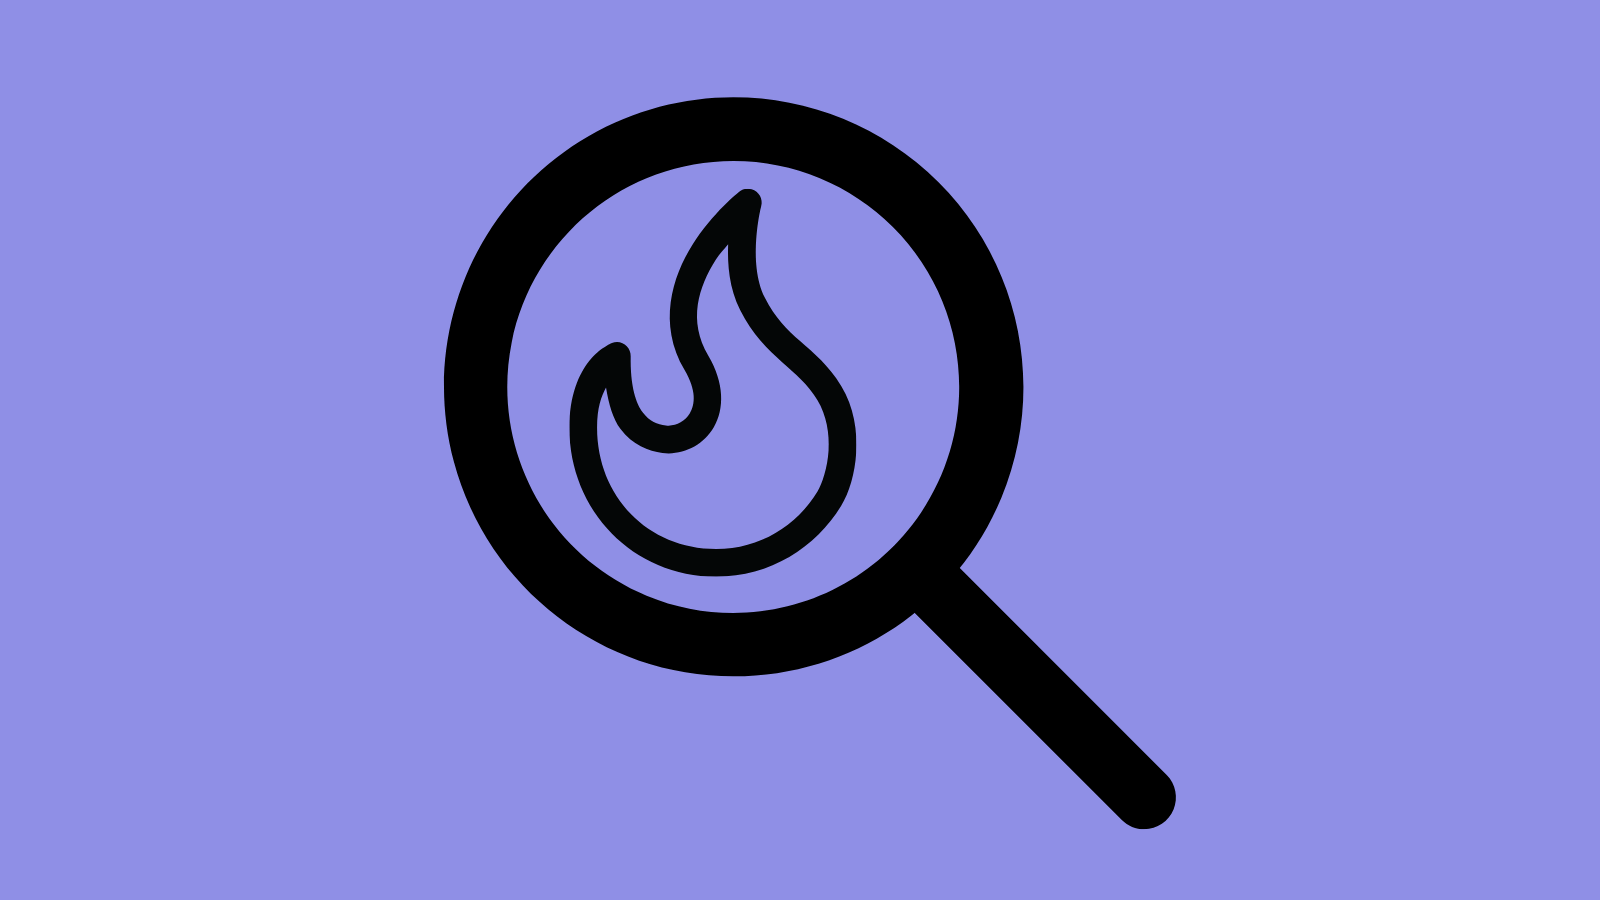 A magnifying glass looking at a flame